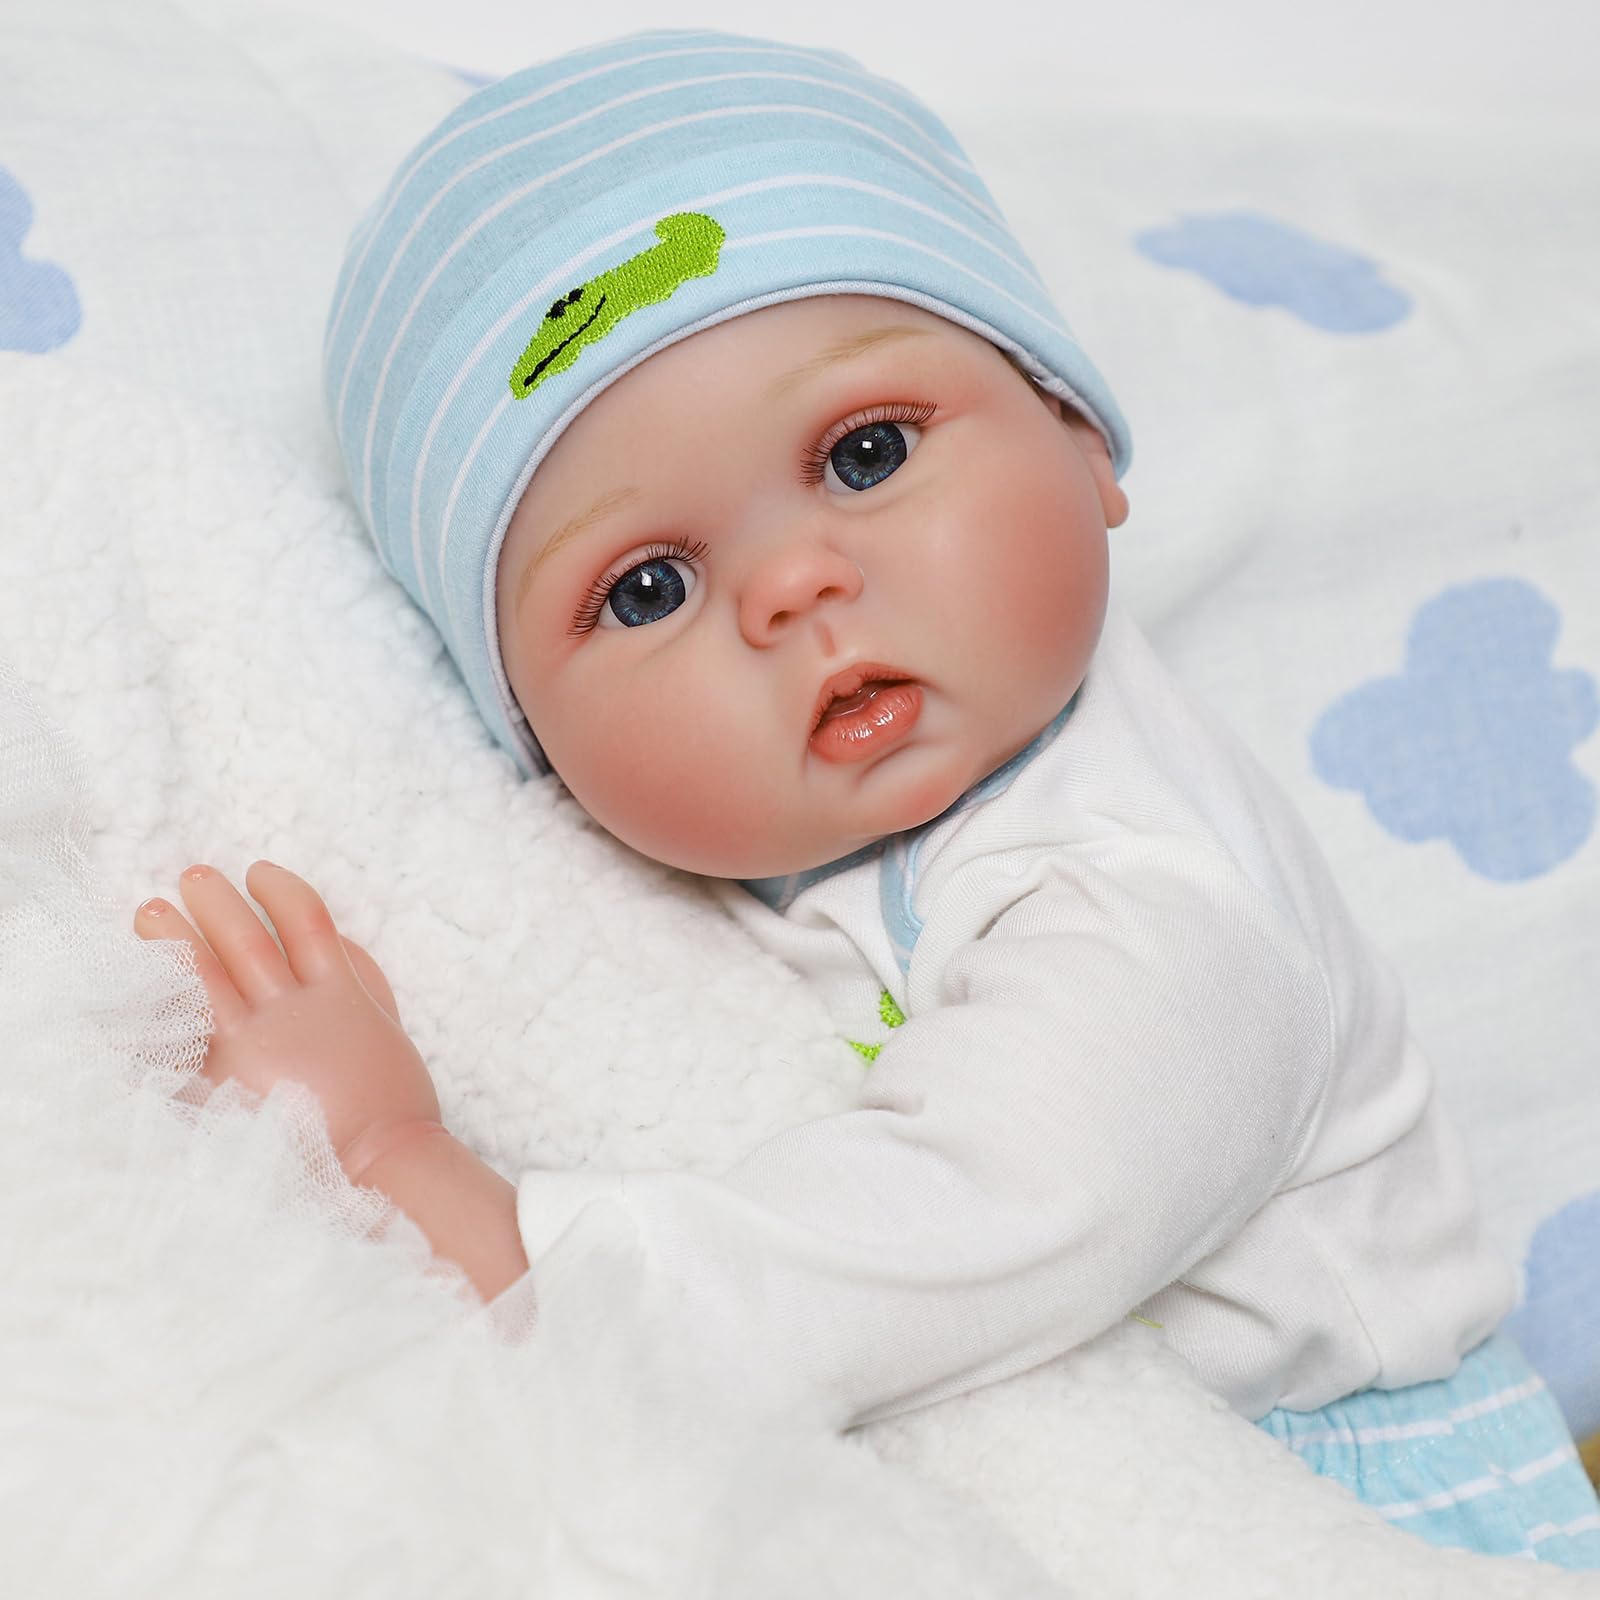 SCOM Lifelike Reborn Baby Dolls - 22 inch Realistic Baby Toddler Dolls Soft Cloth Body Vinyl Limbs, with Clothes and Doll Accessories Gifts for Kids Age 3+ (Blue&Blanket)